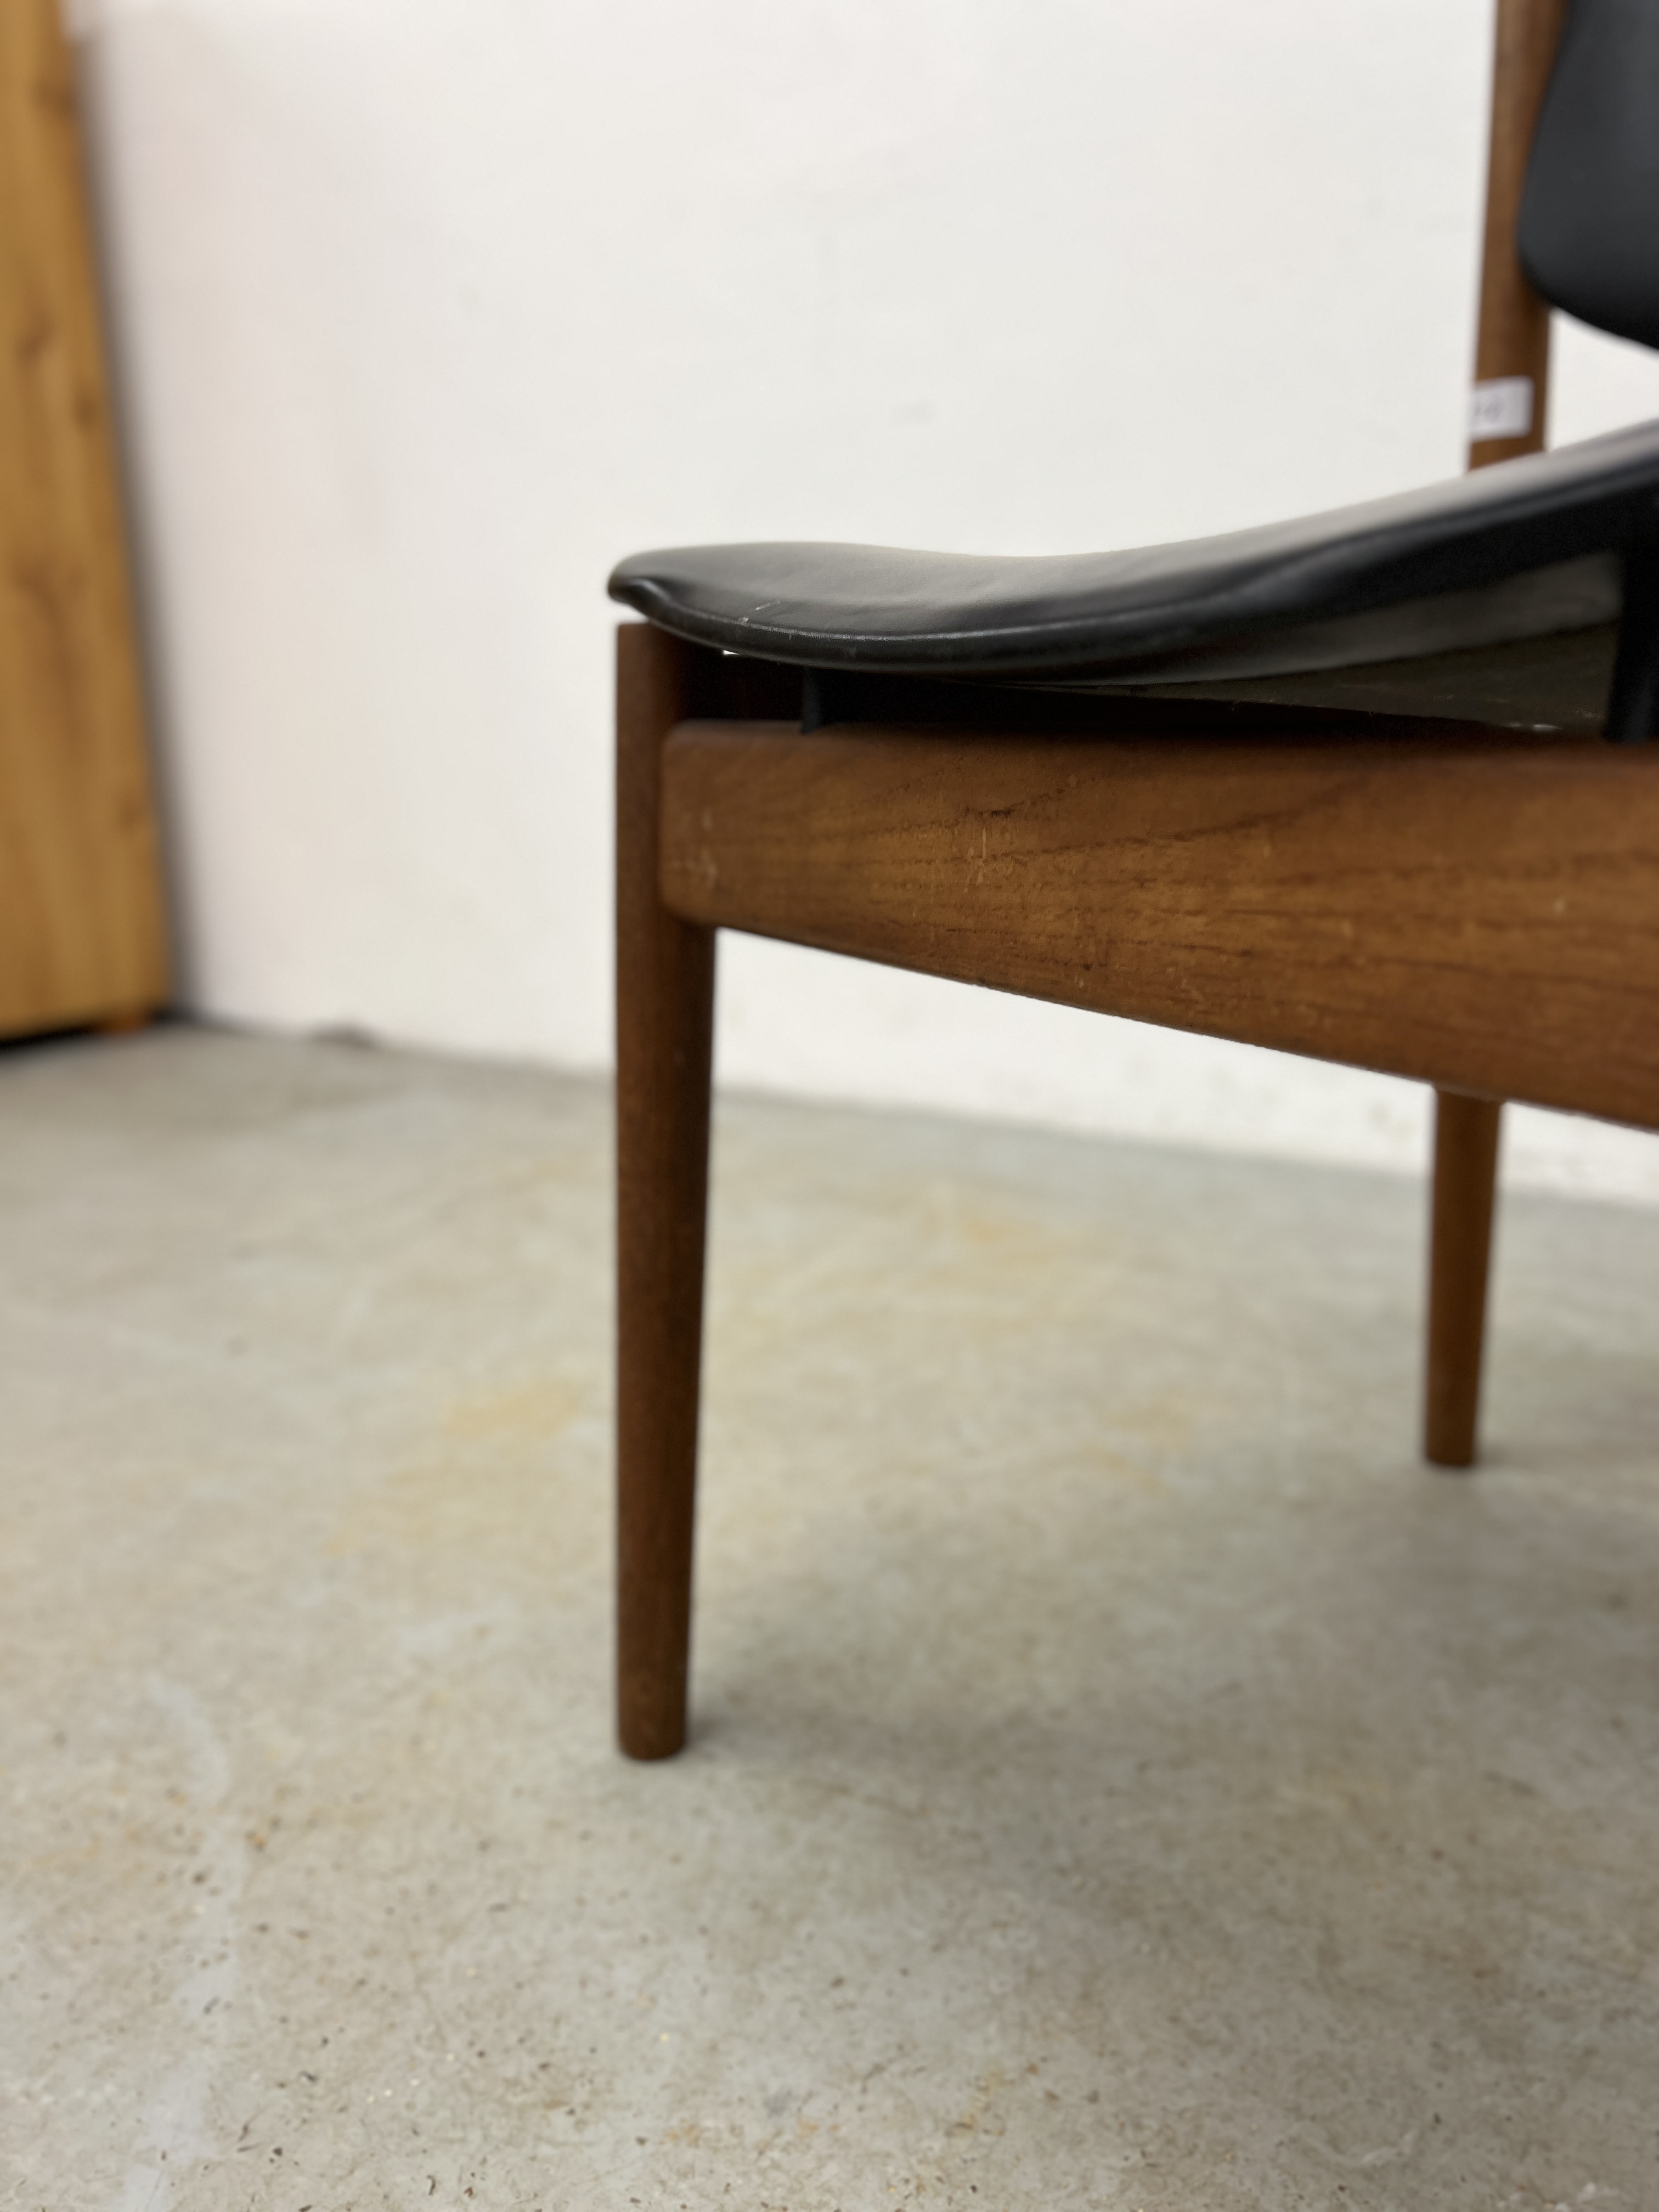 A MID CENTURY DANISH TEAK SIDE CHAIR BEARING LABEL FRANCE & SON. DESIGNED BY FIN JUHL A/F NO. - Image 5 of 10